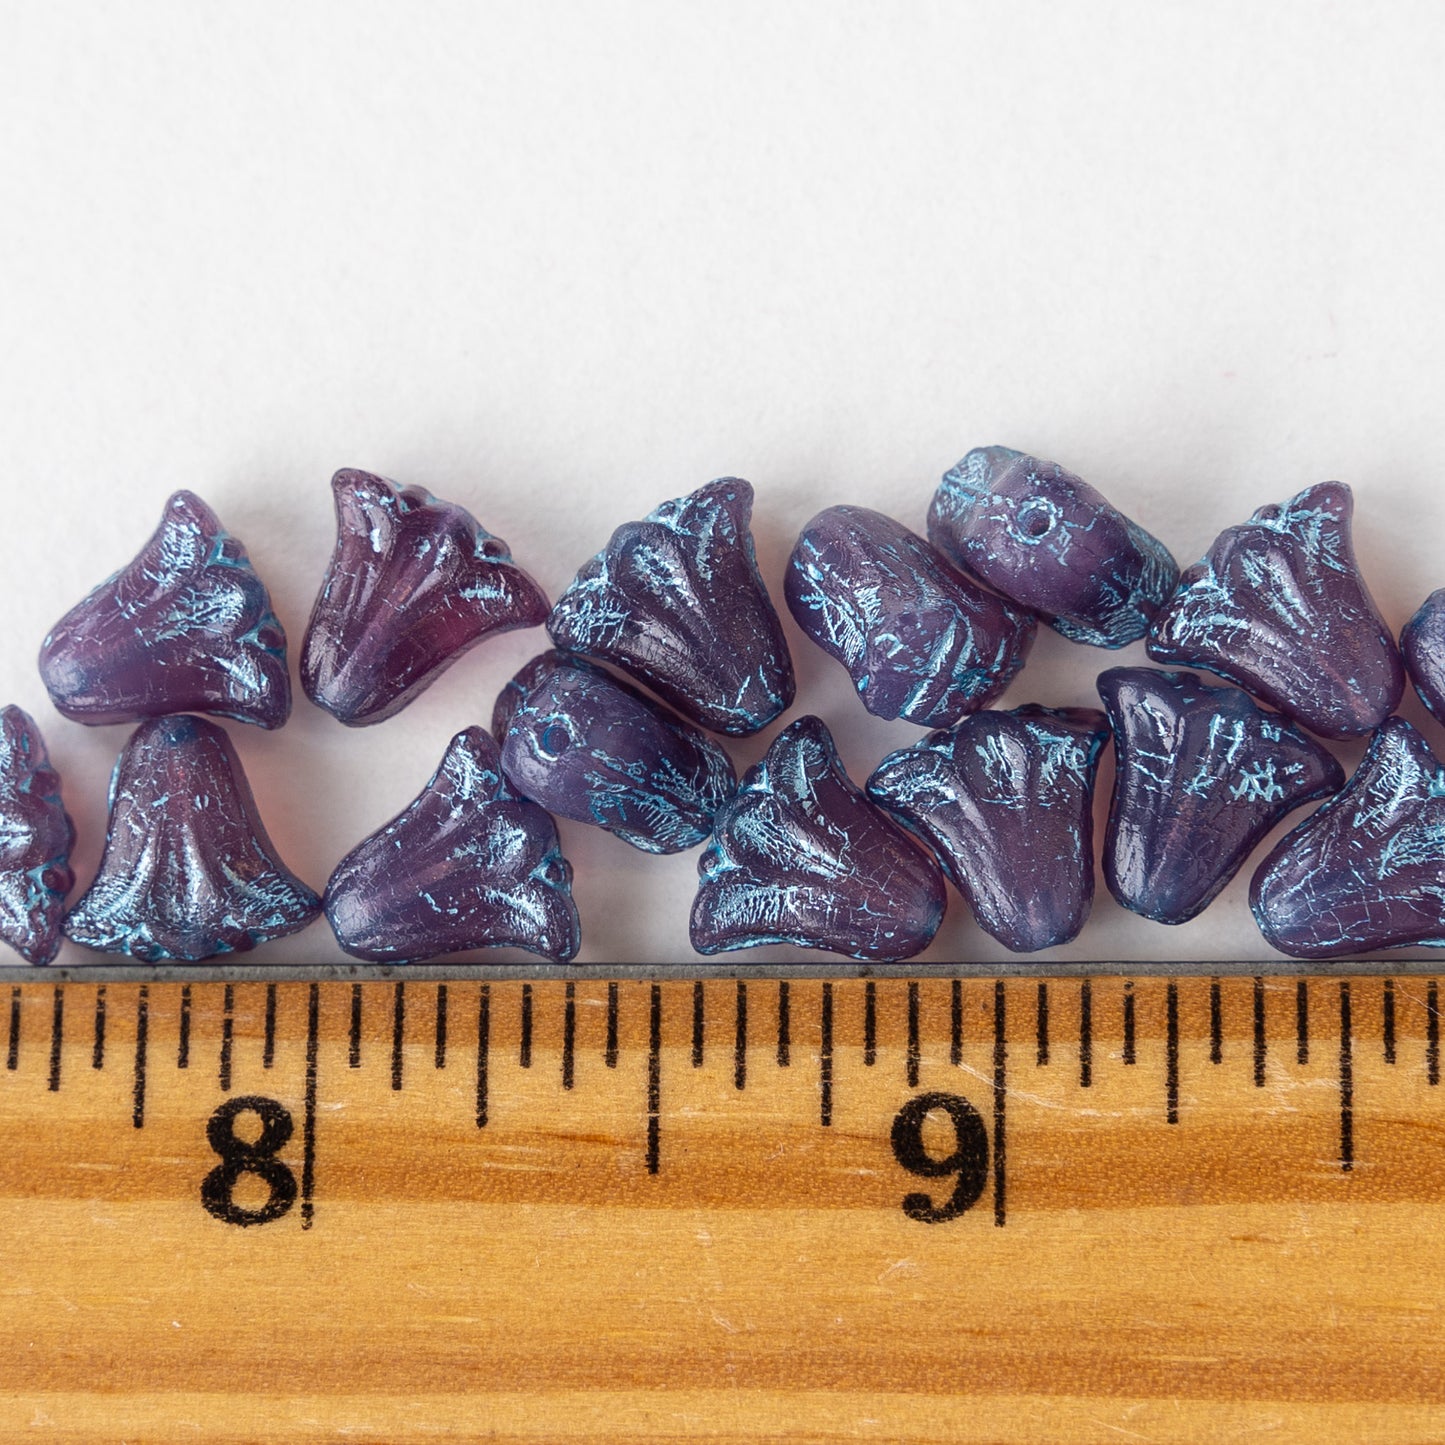 Load image into Gallery viewer, 9x10mm Lily / Tulip Flower Beads - Purple Opaline with Aqua Wash - 15 Beads
